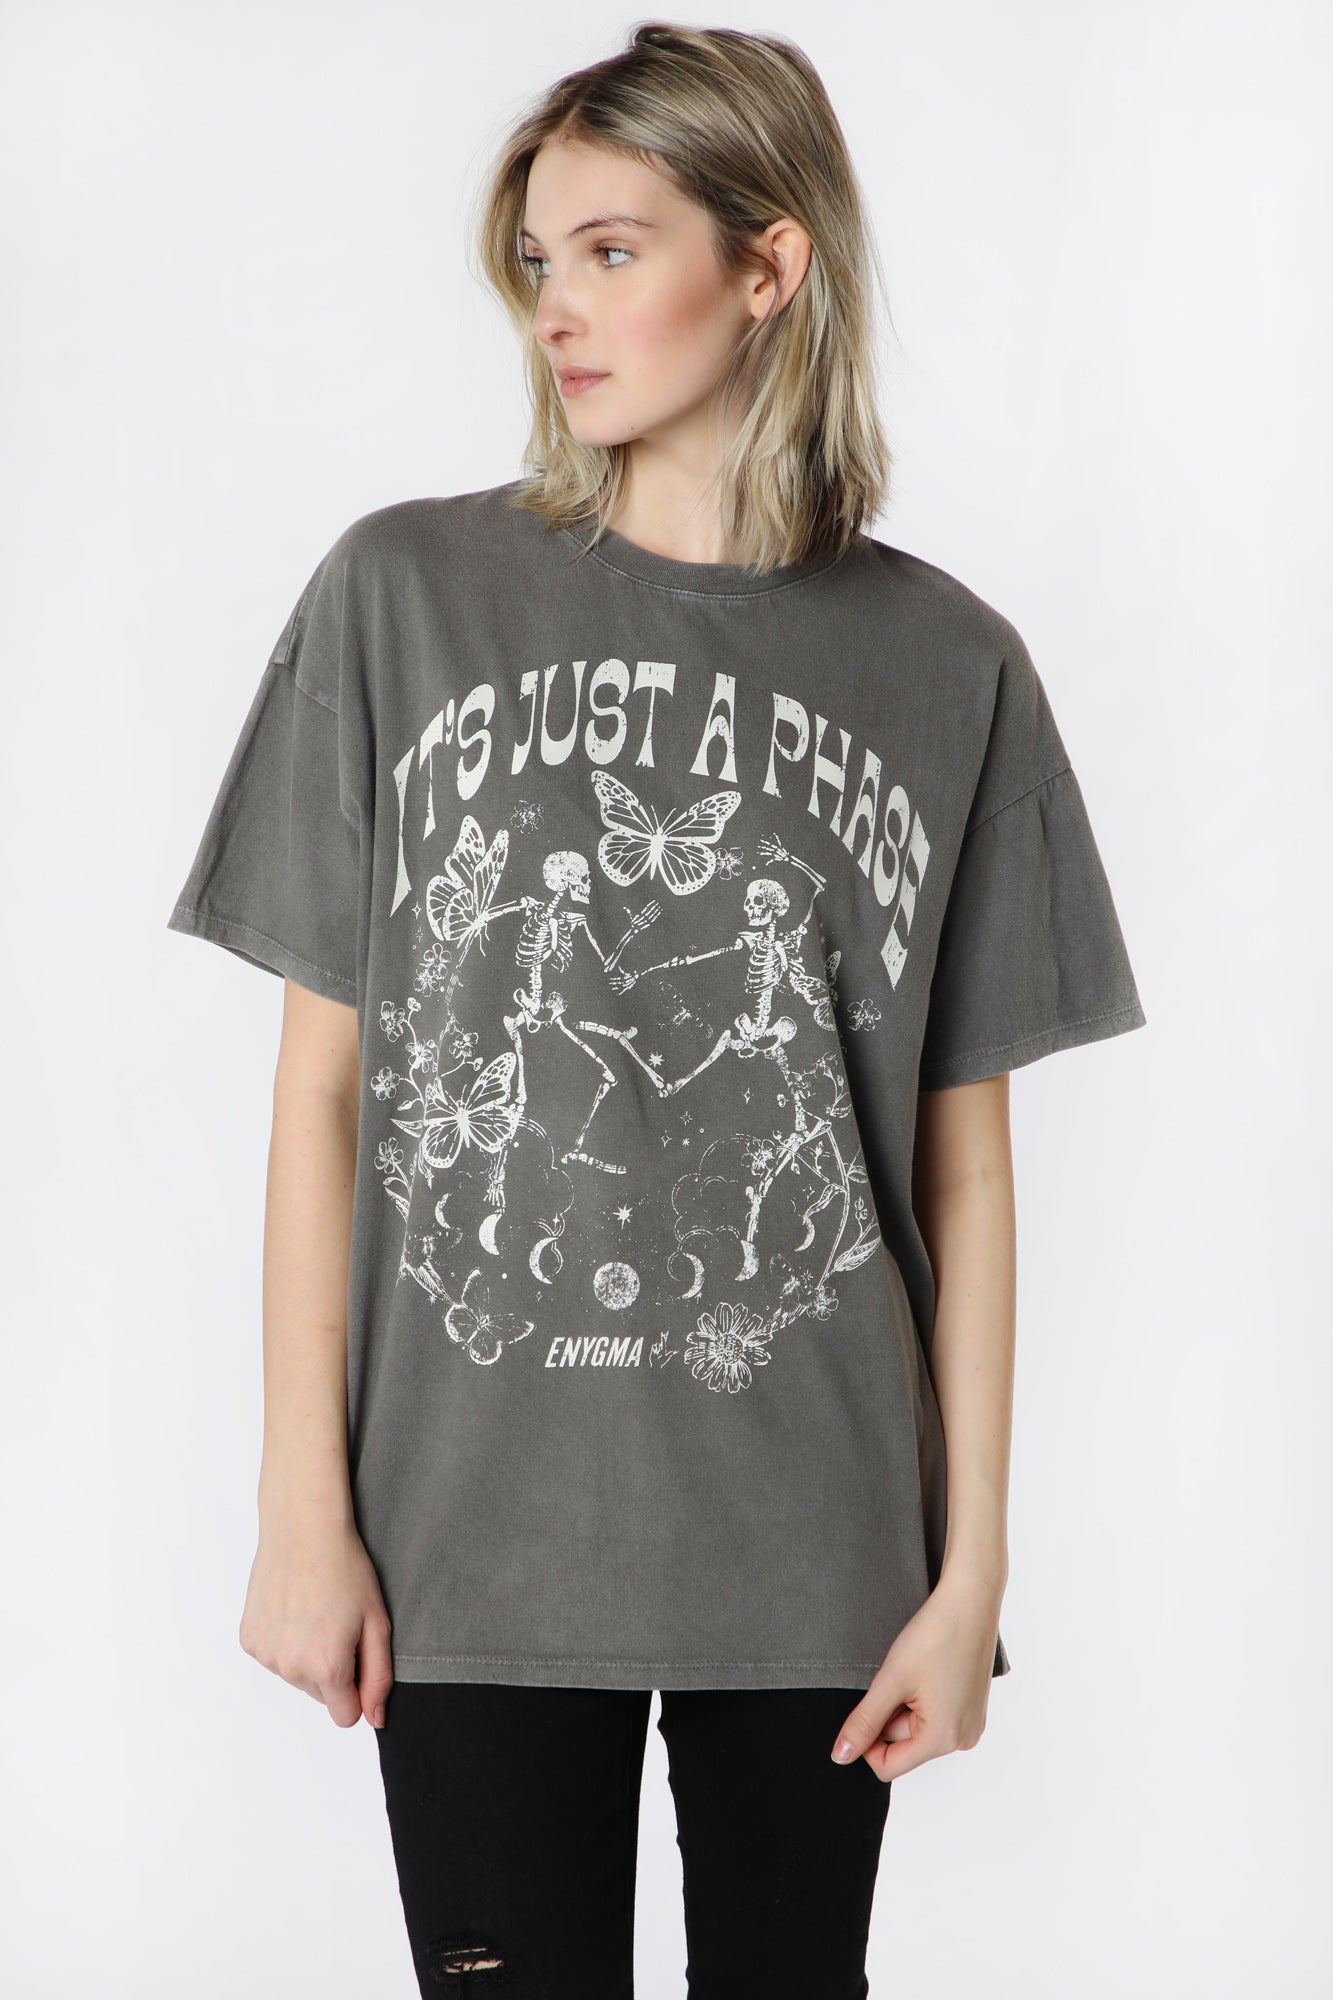 Womens Enygma Just a Phase Oversized T-Shirt - Dark Green /